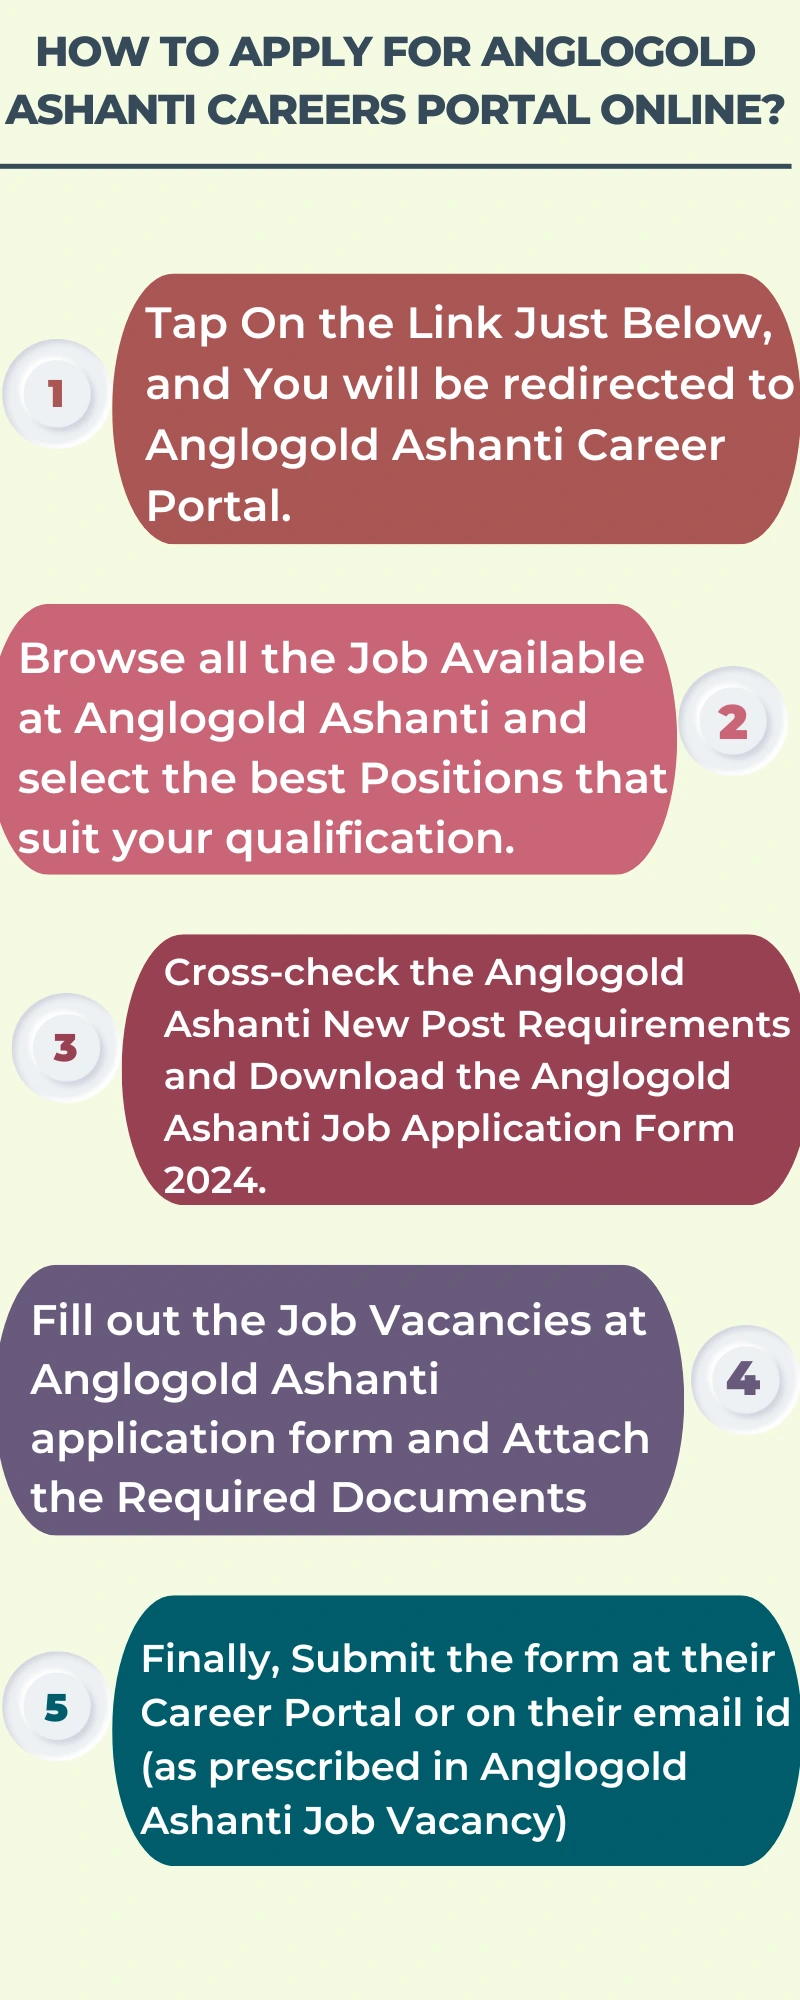 How To Apply for Anglogold Ashanti Careers Portal Online?